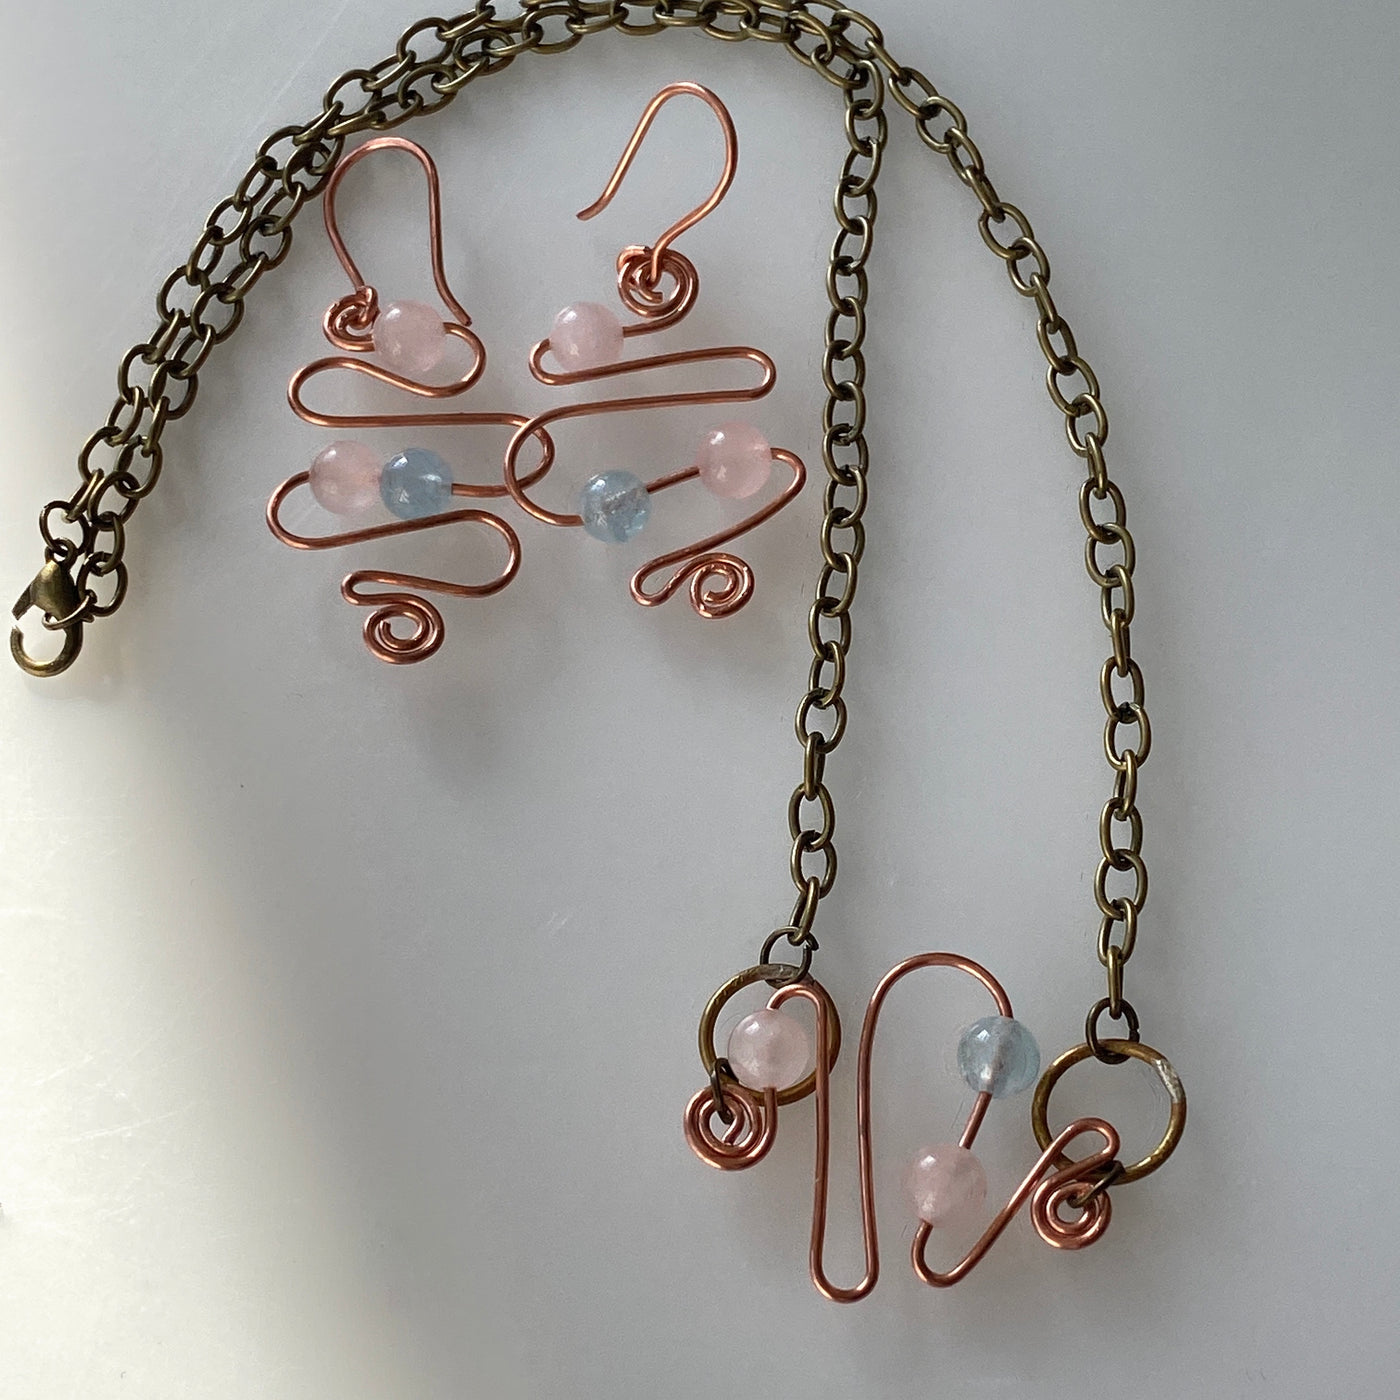 Pendant earrings with acquamarine and rose quartz in curly wire